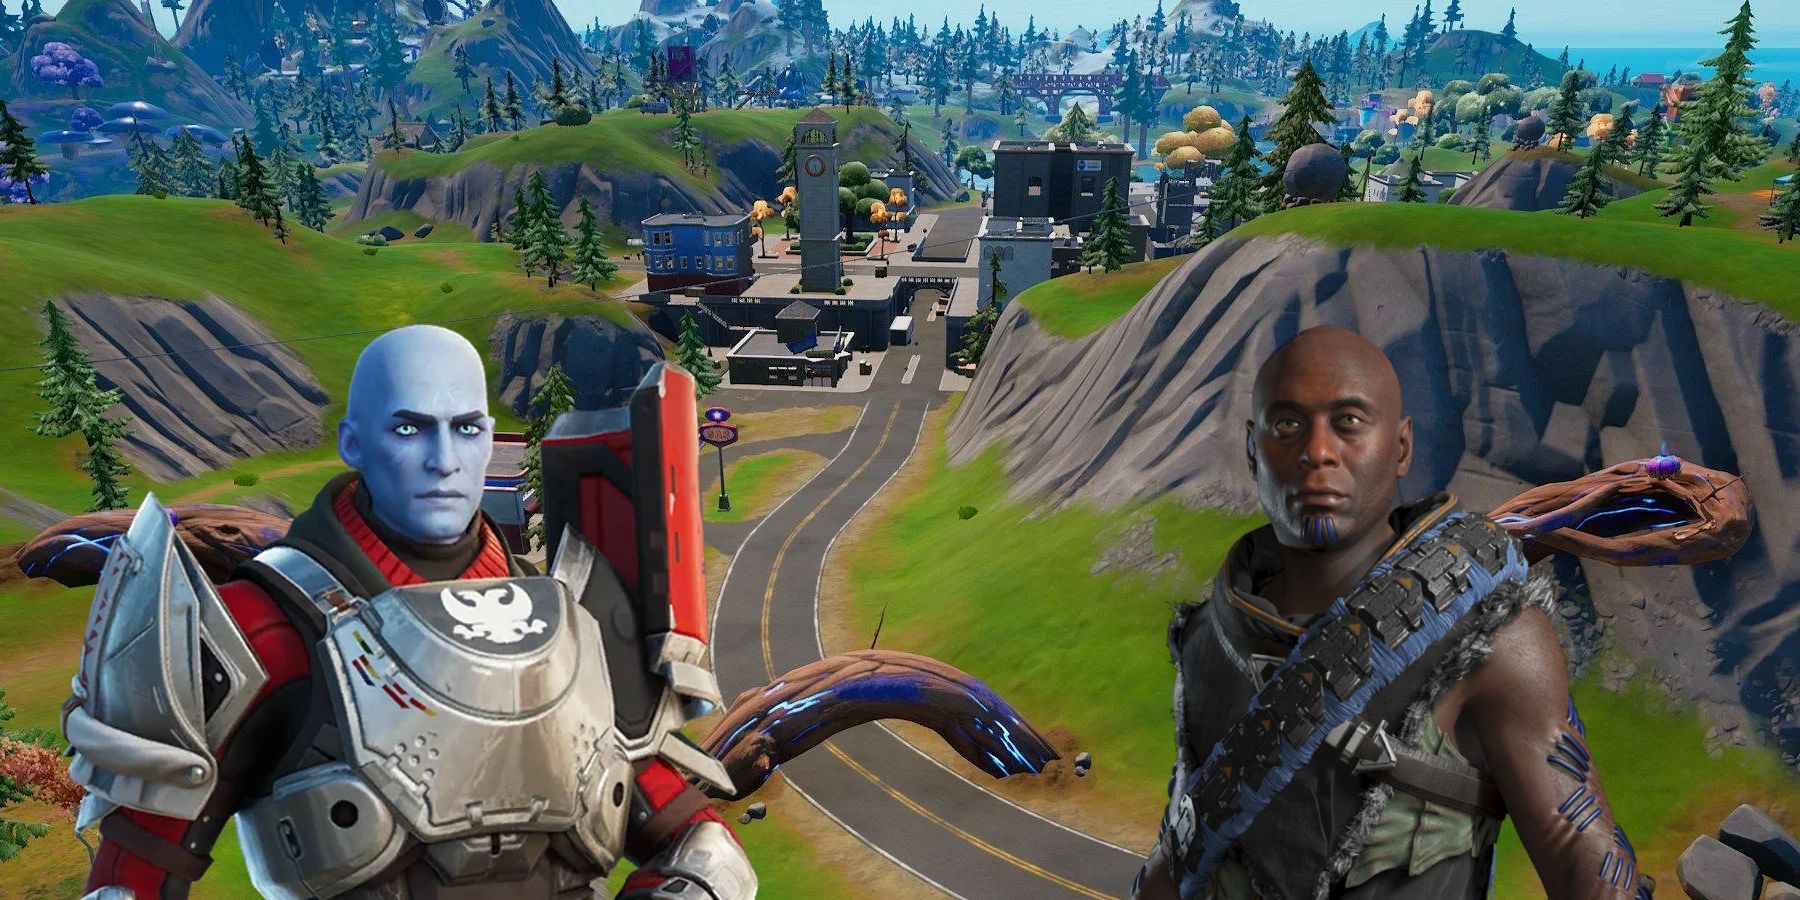 epic games crossovers lance reddick characters